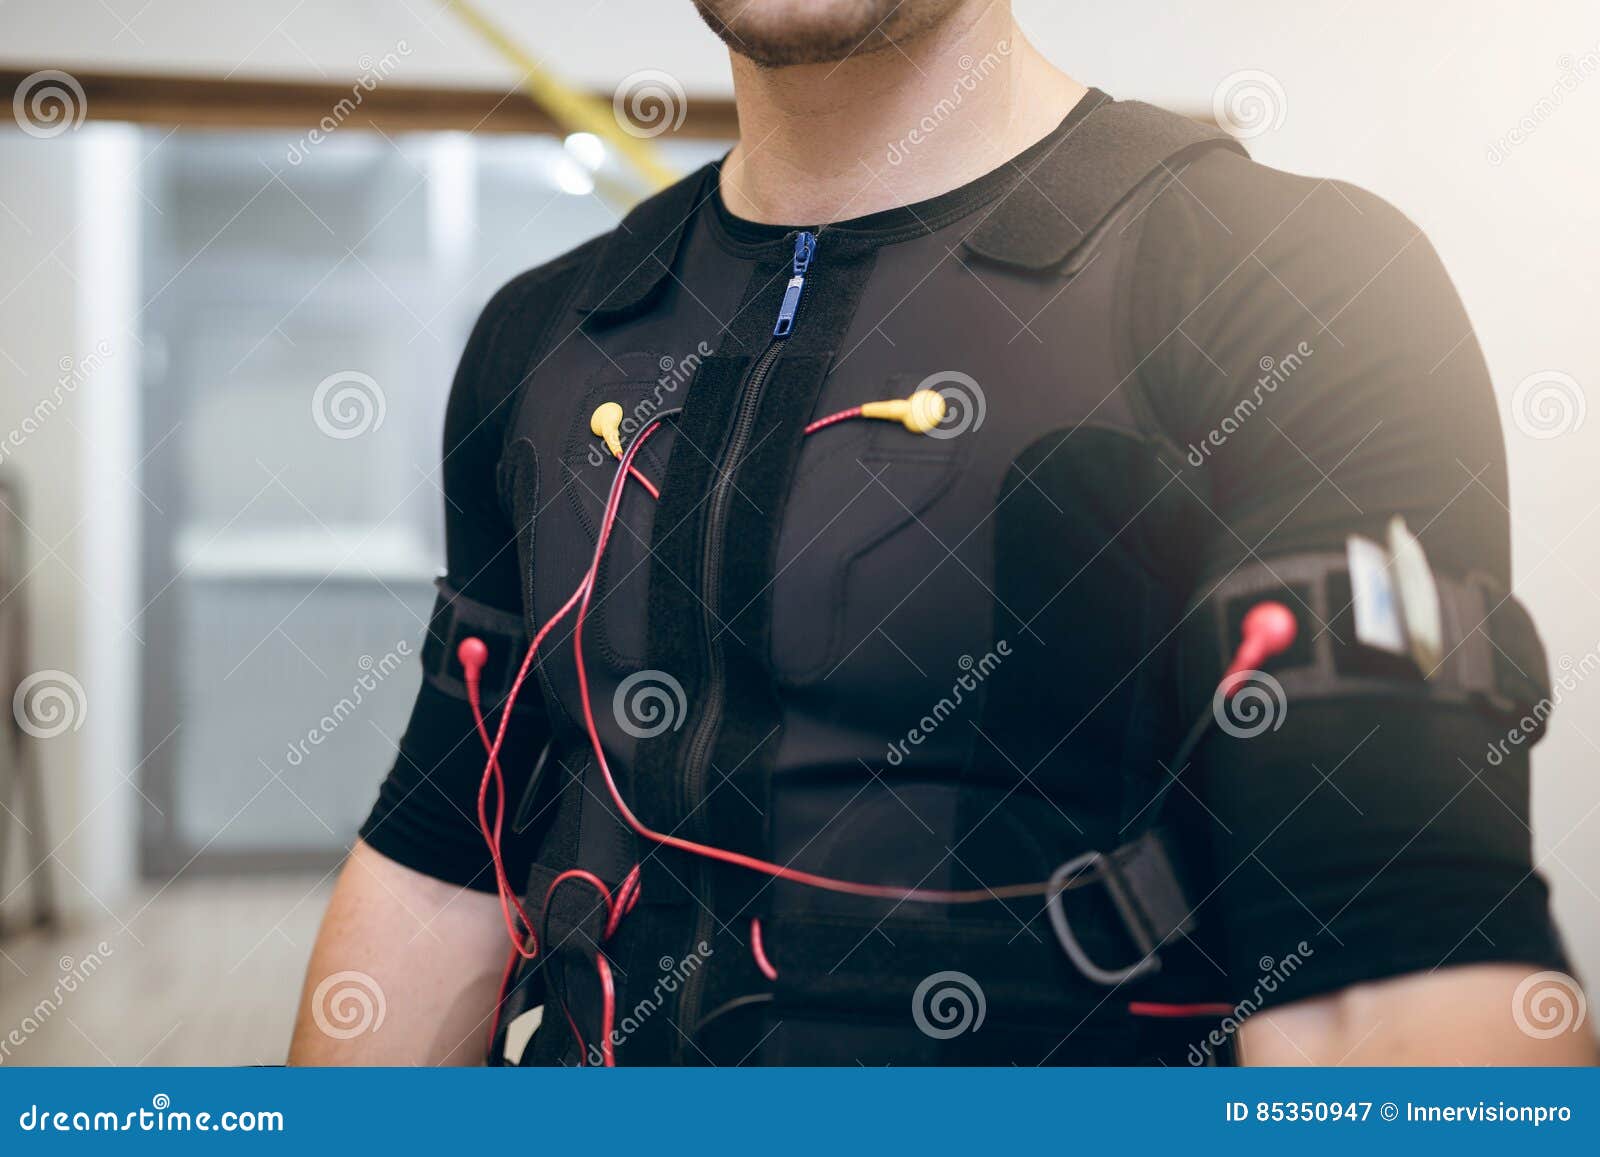 man in black suit for ems training